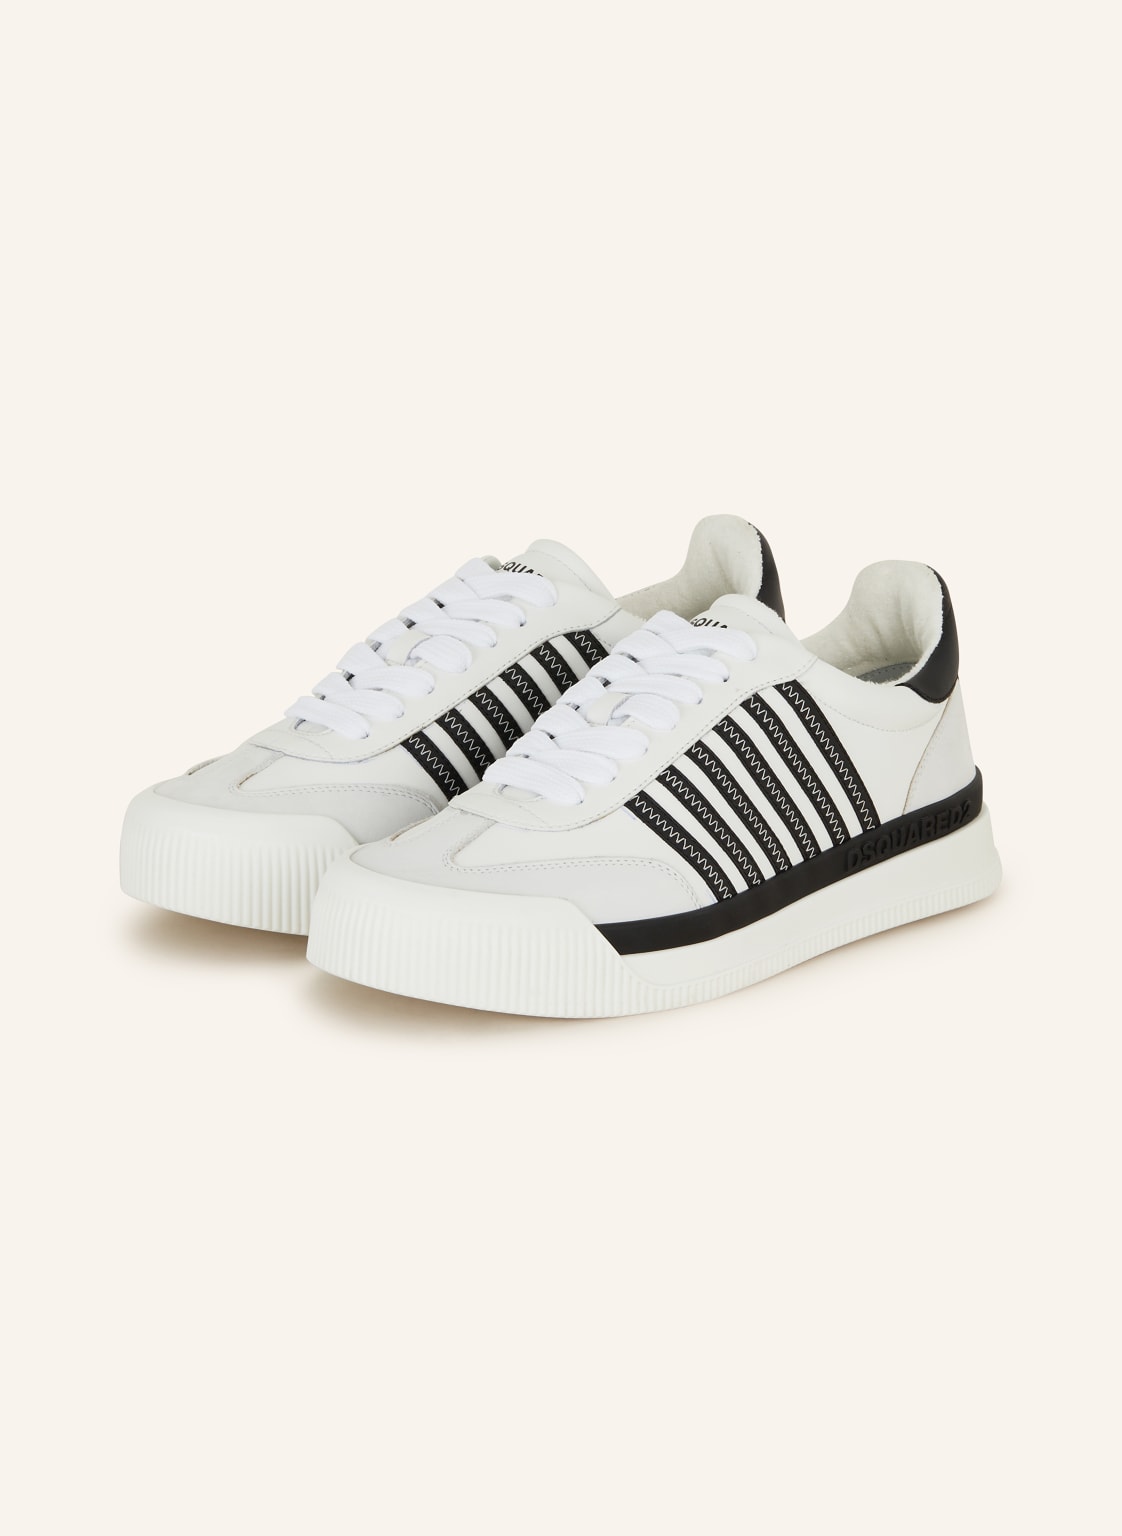 dsquared2 Sneaker New Jersey weiss von Dsquared2